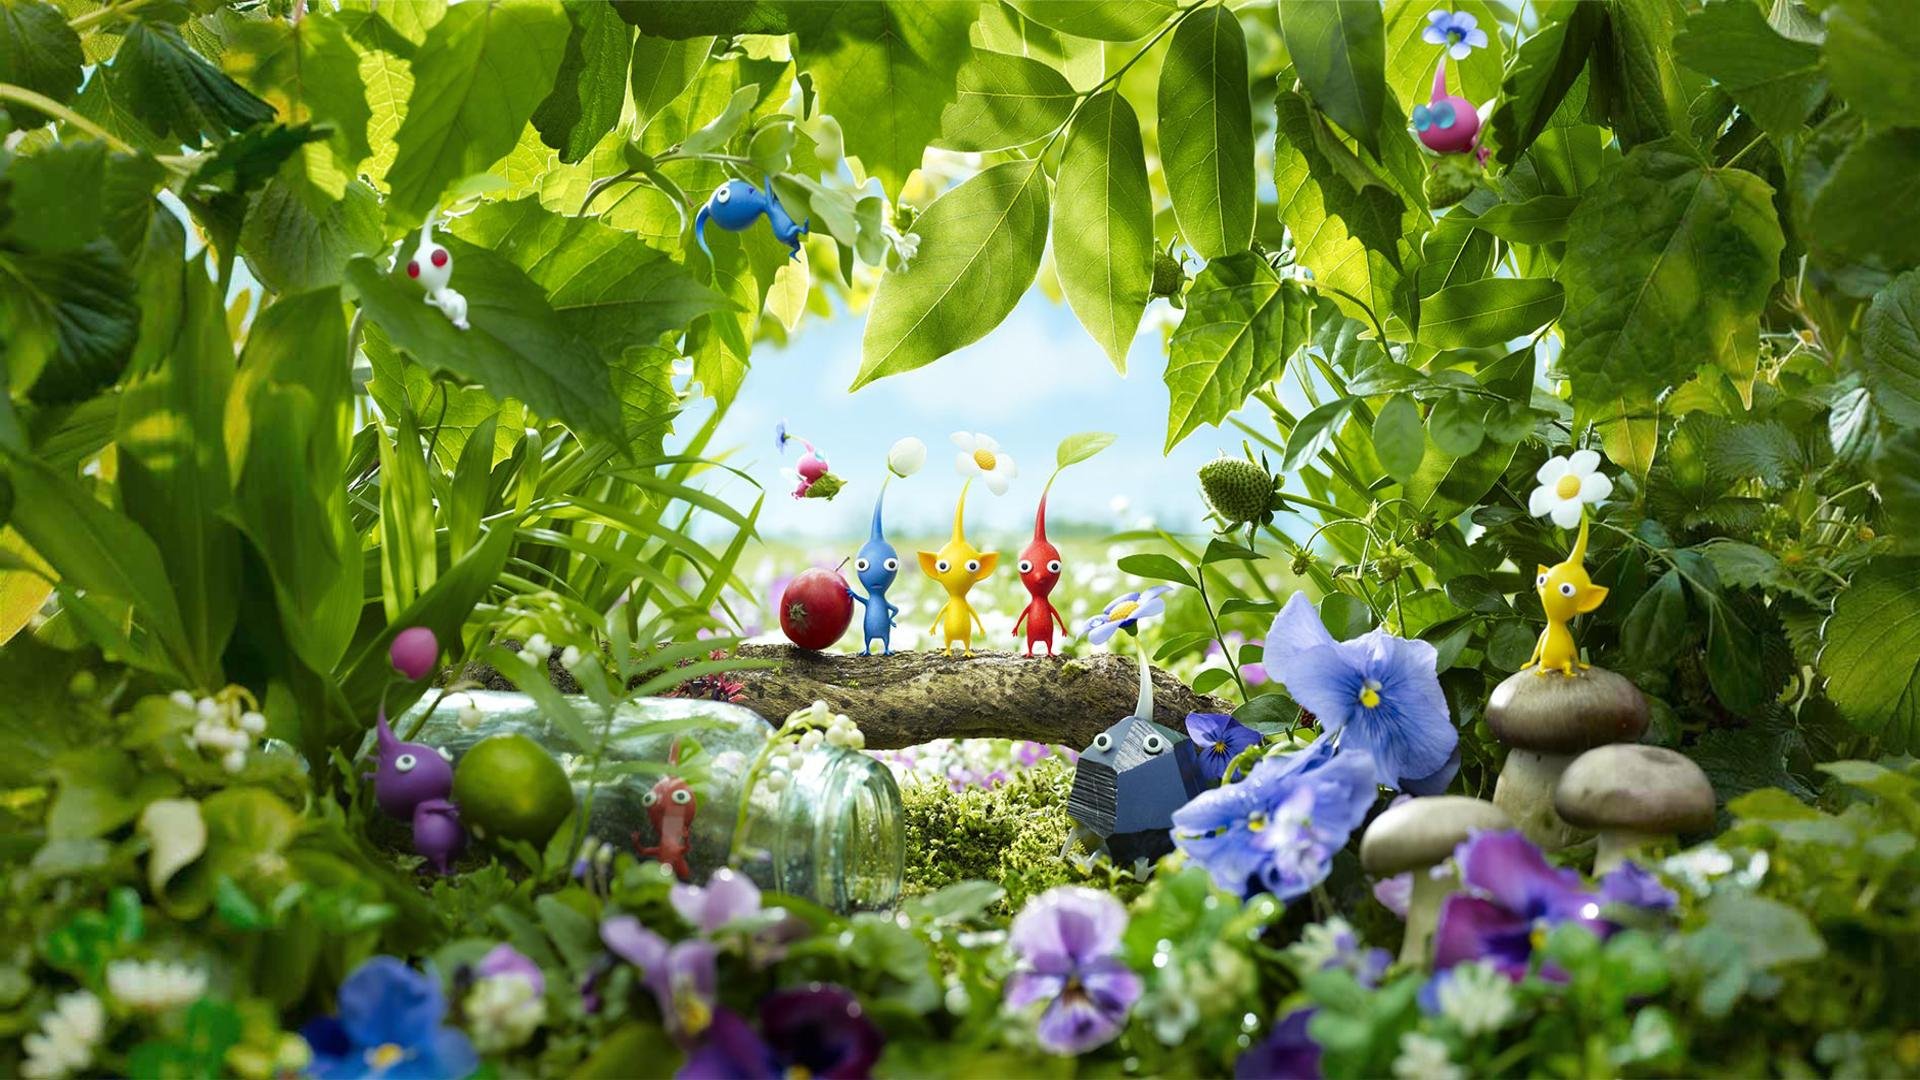 Pikmin Wallpapers